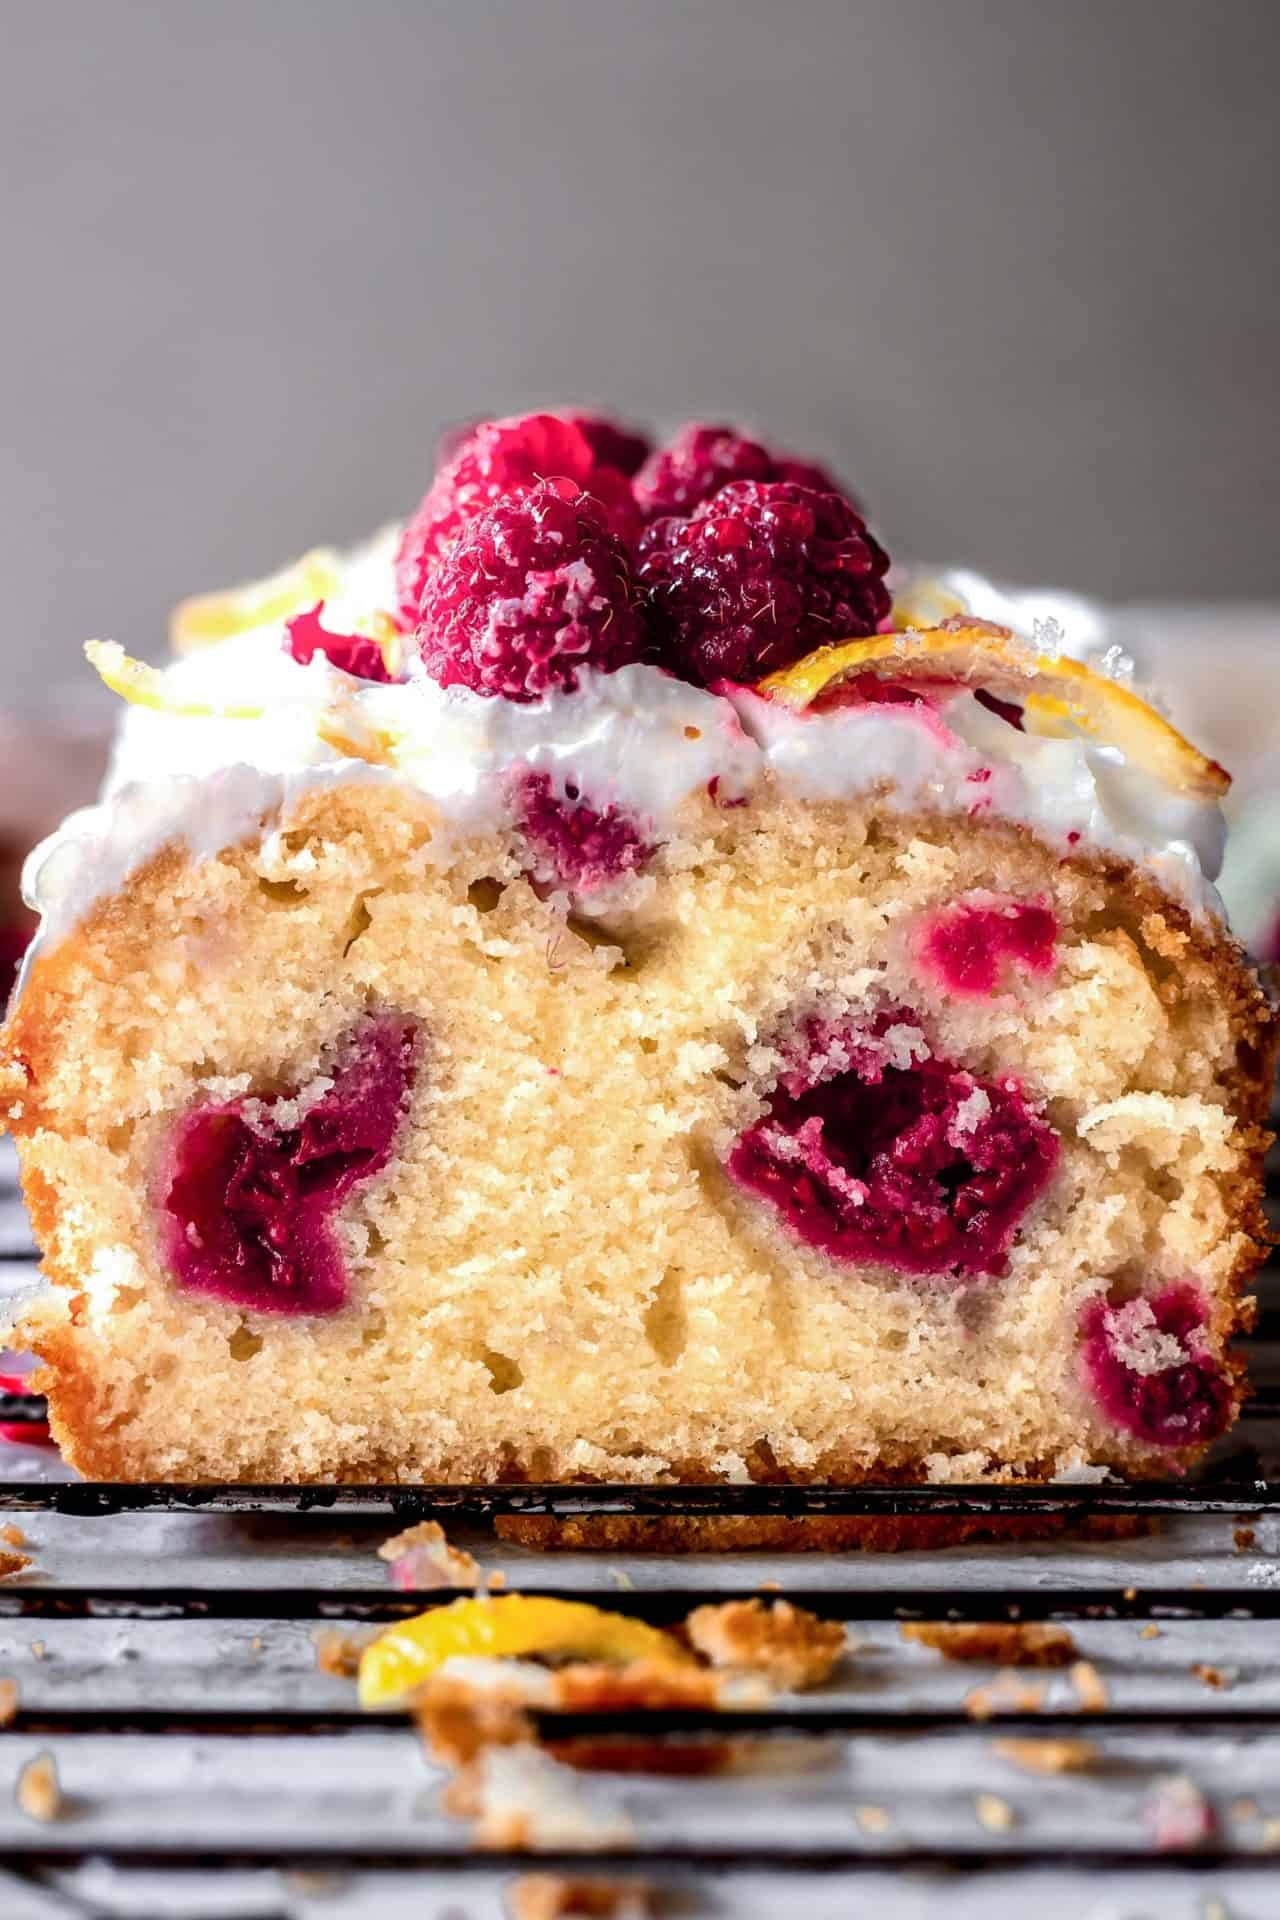 This Gluten-Free Lemon and Raspberry Loaf Cake is light, fluffy, perfectly sweetened, lemony, flavorful and so delicious!